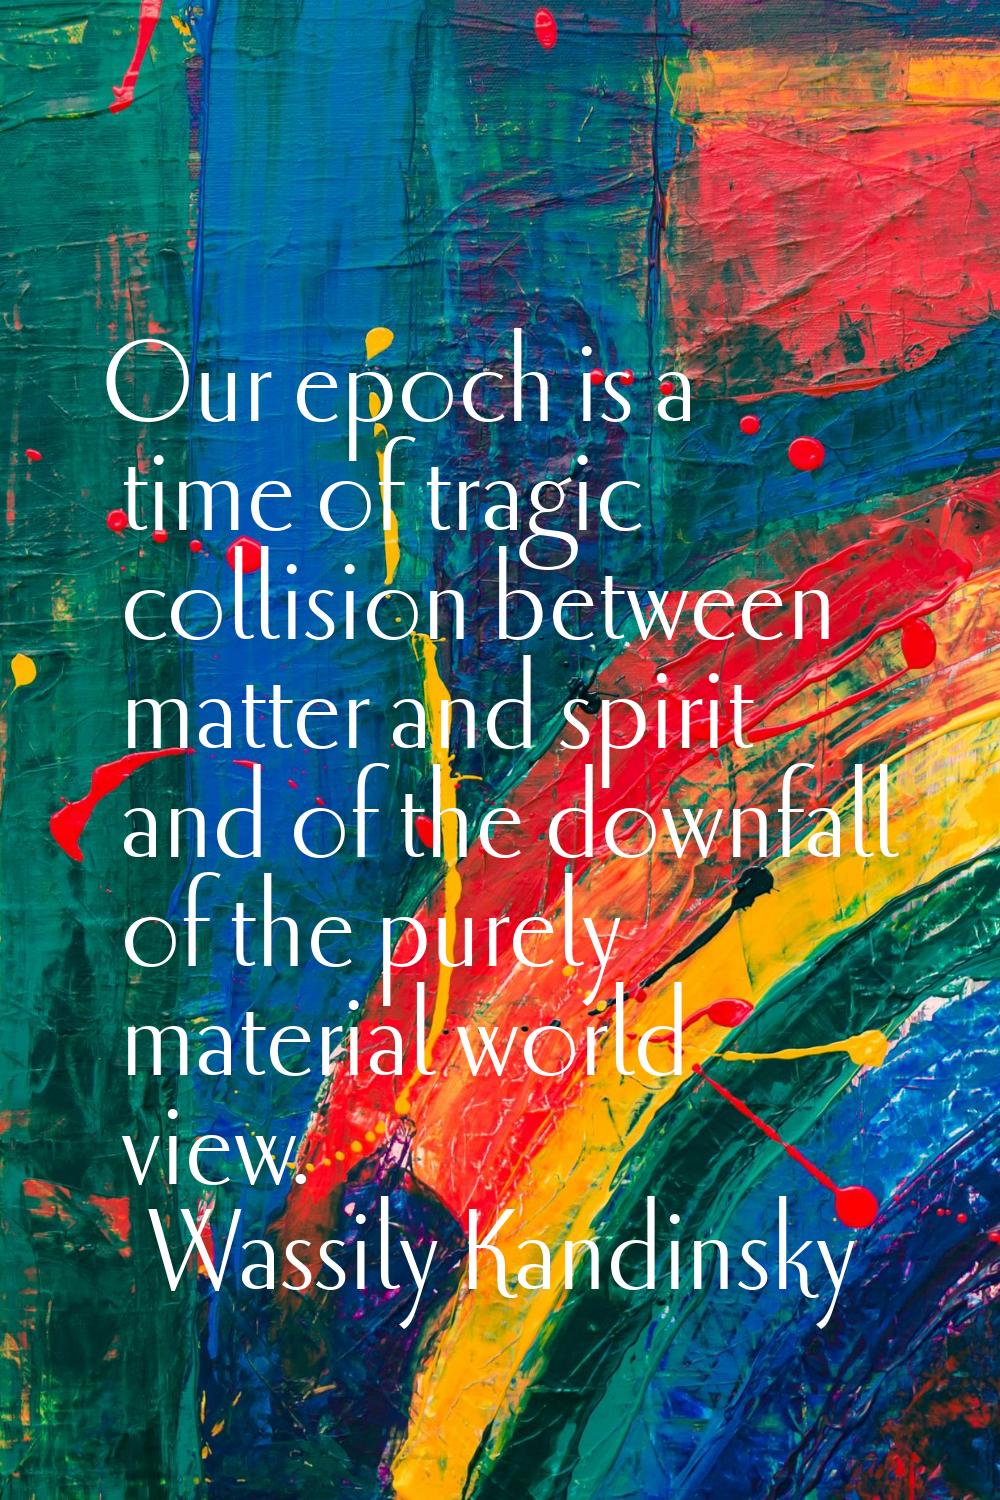 Our epoch is a time of tragic collision between matter and spirit and of the downfall of the purely